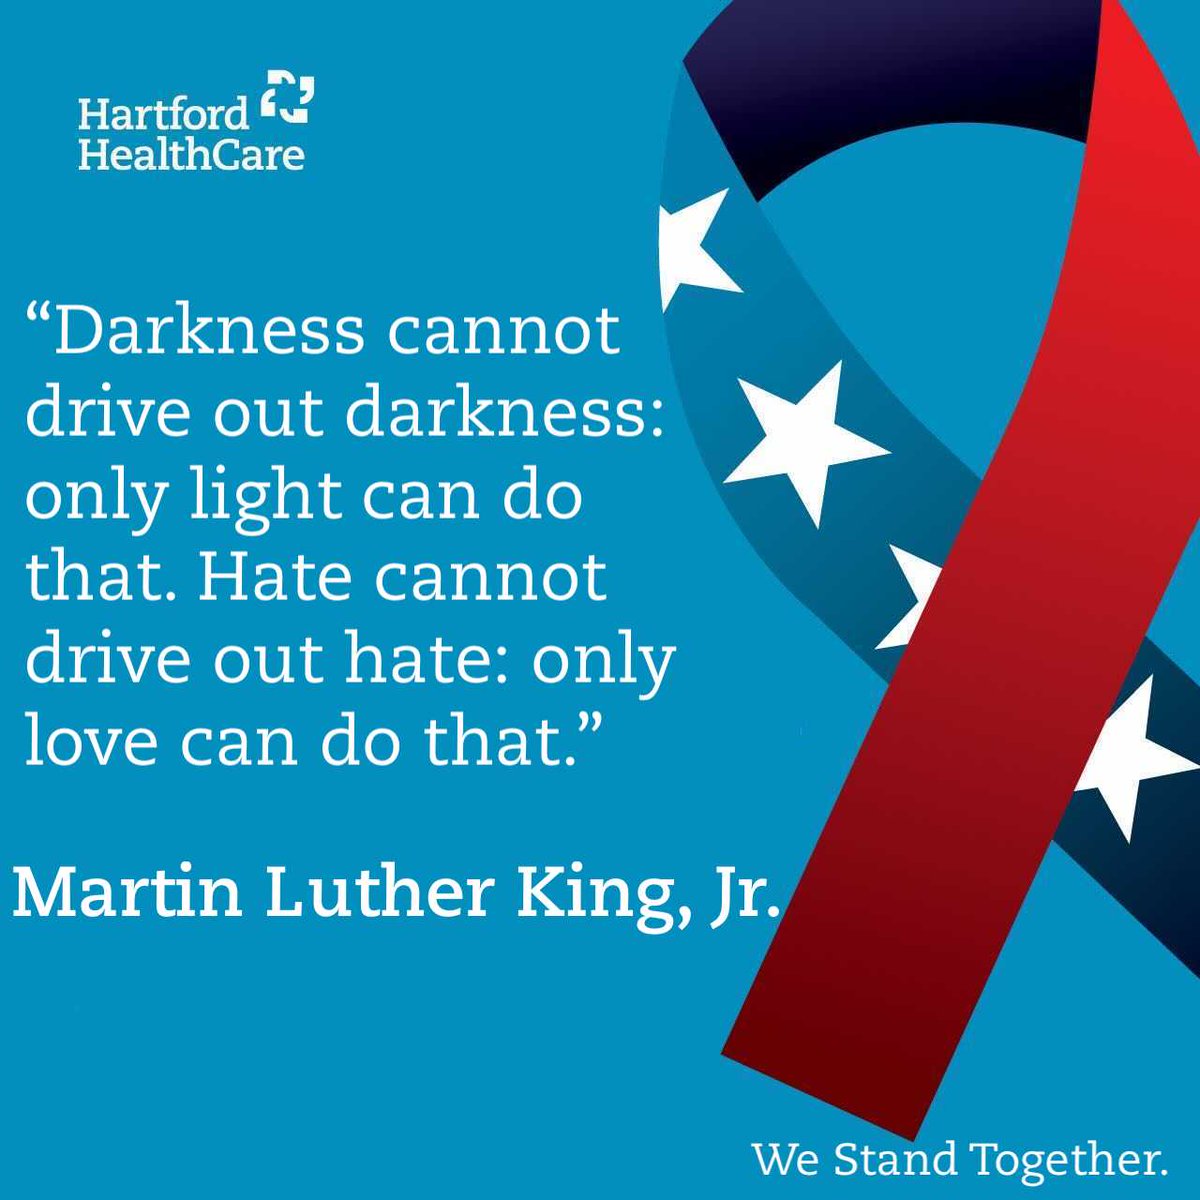 Today we honor Martin Luther King, Jr. On this day we reflect on the work that still needs to be done and the changes we can all make together. Today is meant to be a day of service, while celebrating the accomplishments of a great civil rights leader. #westandtogether #mlkjr